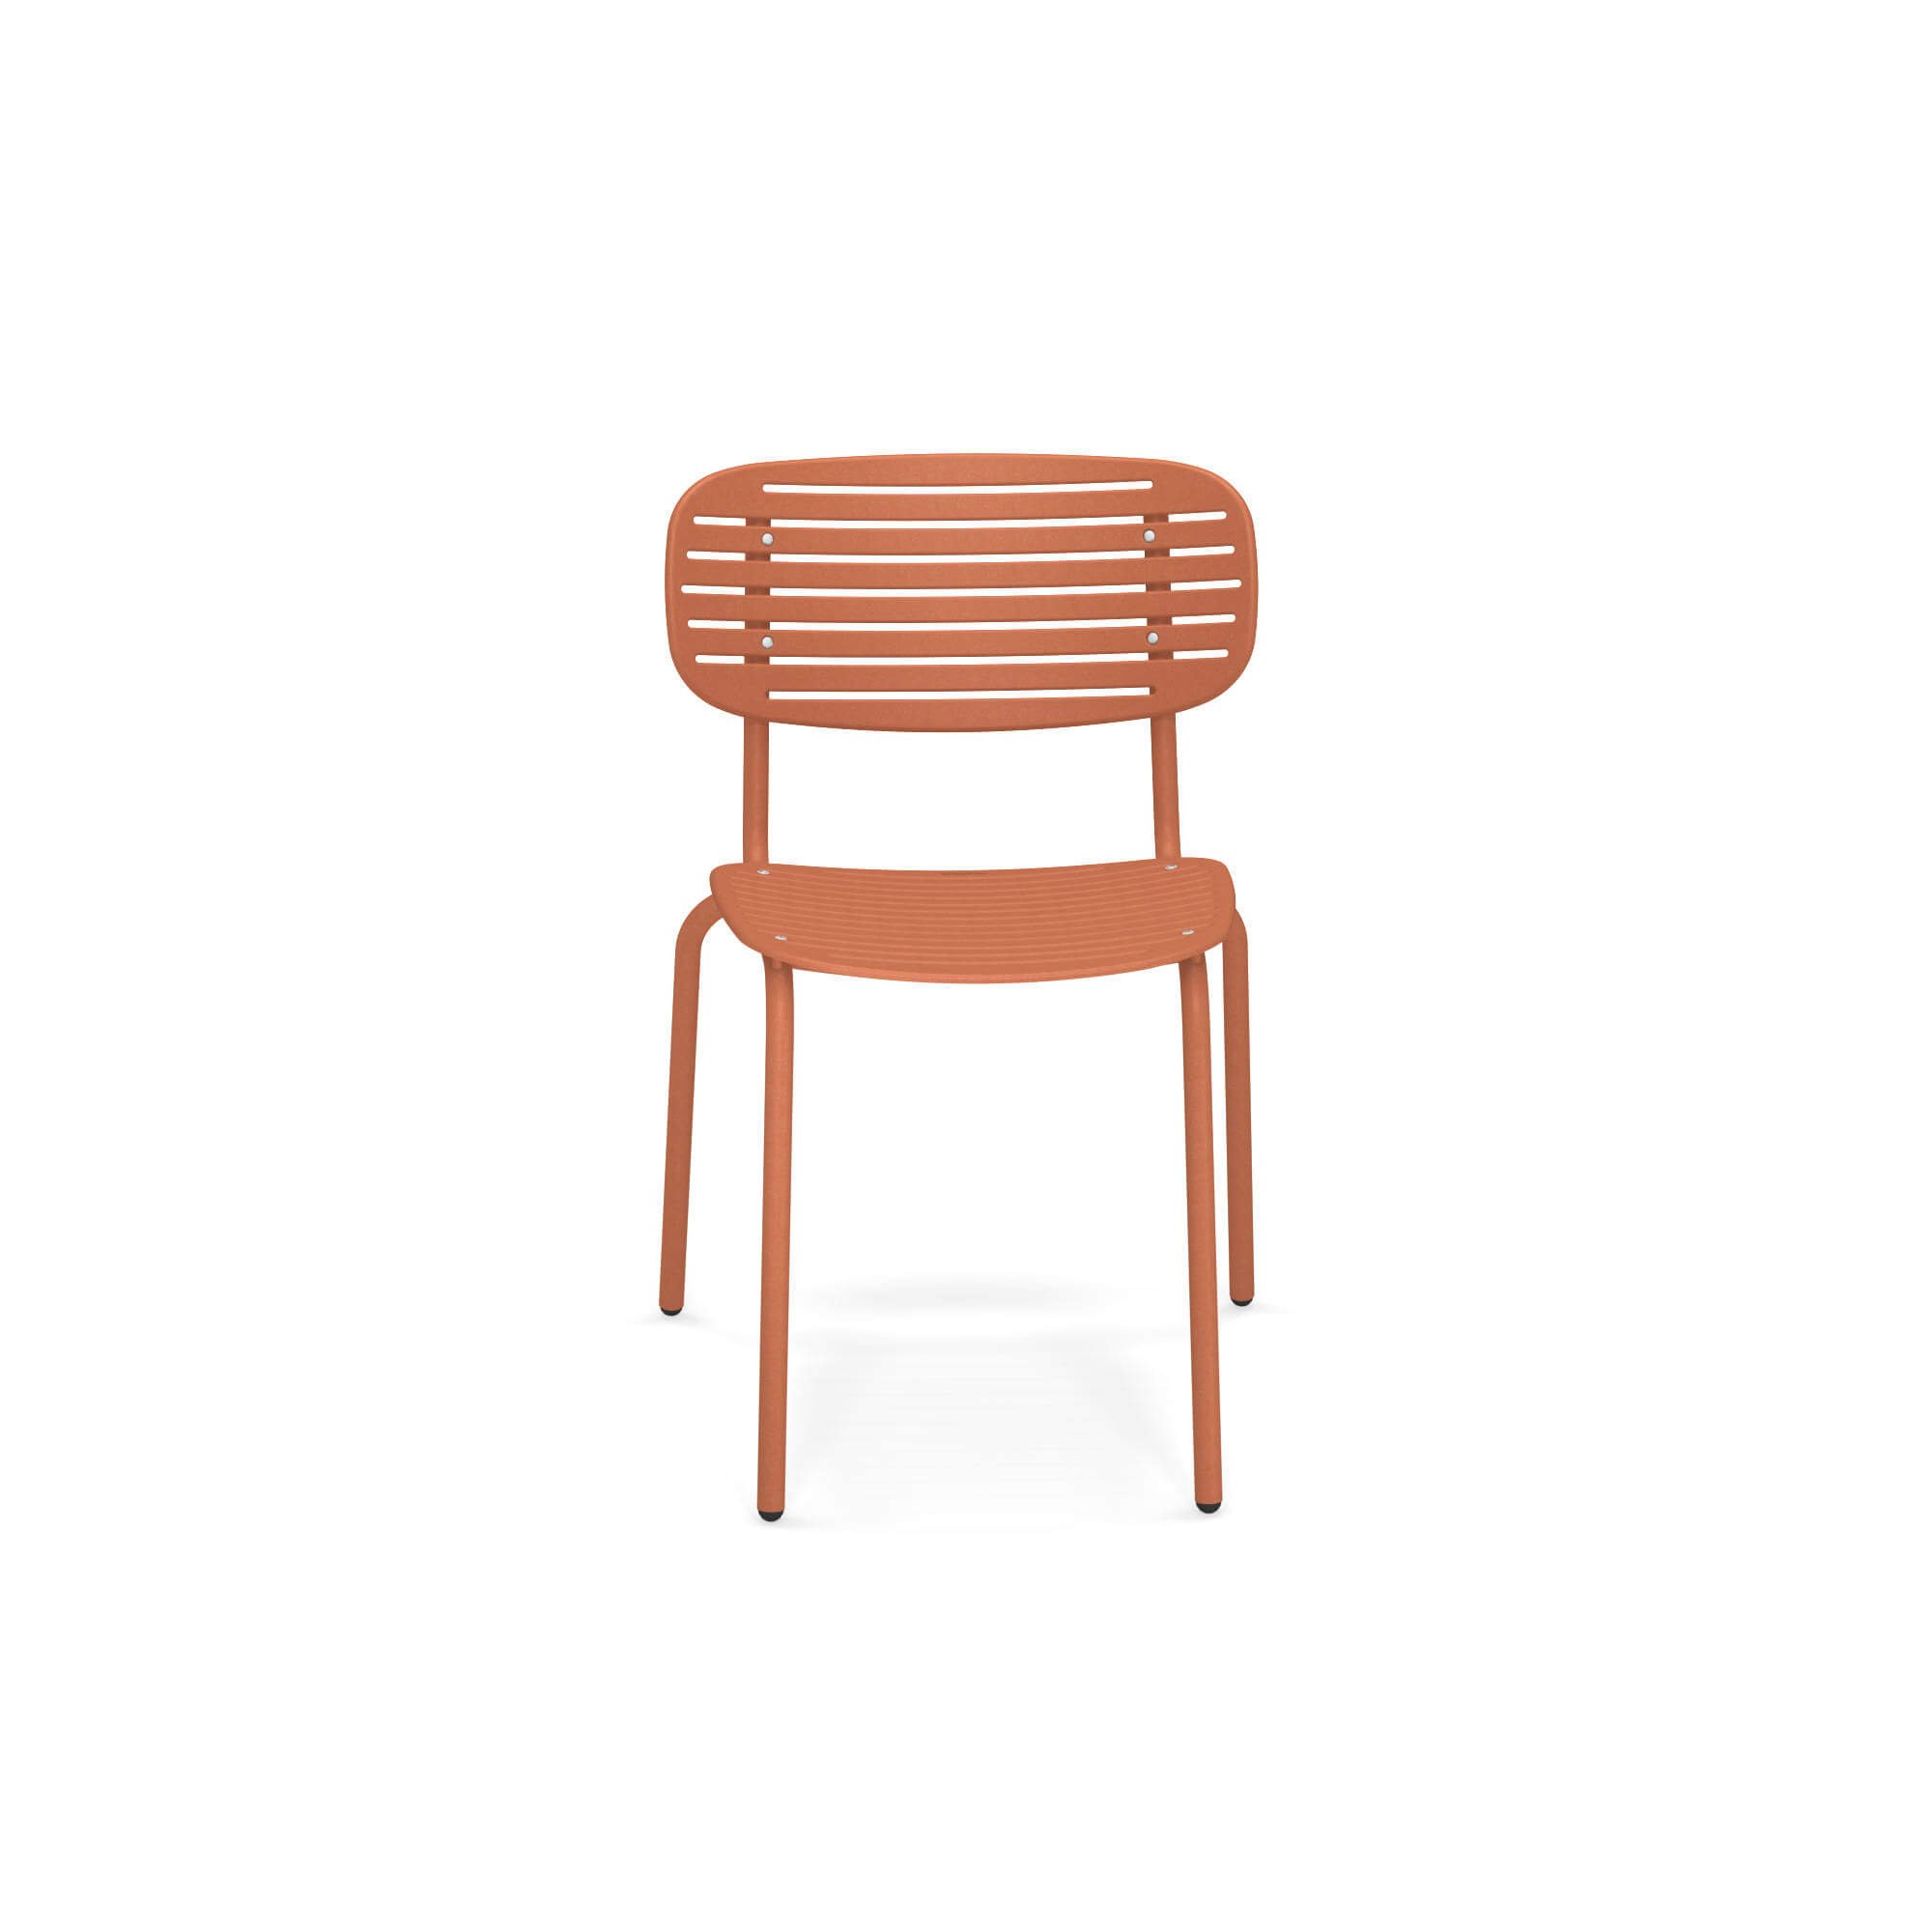 Mom Chair from Emu, designed by Florent Coirier